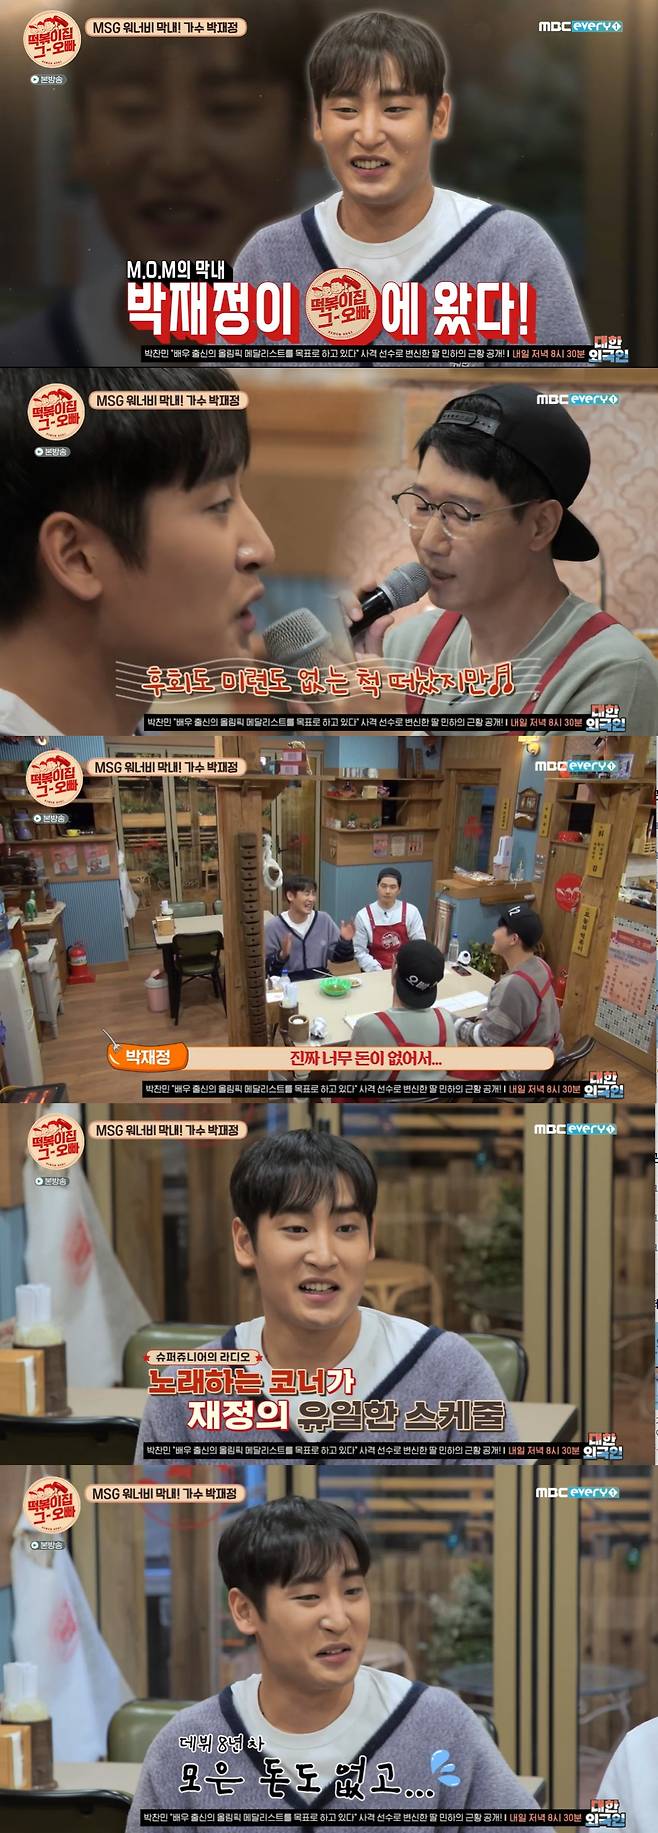 MBC Everlon Tteokbokki house brother was broadcast on the 29th, and Your Name was decorated with keywords, and MSG Wannabes youngest singer Park Jae-jung was on the scene.Park Jae-jung said, Ji Suk-jin is very caring to people on the air, but he is very charismatic when he produces and works.On this day, Park Jae-jung showed M.O.Ms new song Will You Want to Listen with Ji Suk-jin on the spot.After listening to the song, Lee Yi-kyung said, I listen to this song all the time, and it is so good to listen live.Ji Suk-jin praised the finances, saying they were powerful tones.Park Jae-jung answered MCs question of whether he was rewarded by Ji Suk-jin, saying, It should be three to six months with the original song.Kim Jong-min said, We have to check that clearly.Ji Suk-jin said, I told him to divide the profits by a quarter, and the finances said, Im not taking the risk. But how can I not?Its not settled yet, but it wont be bad. Park Jae-jung brought up the story of his past win of the AudiSean program; Ji Suk-jin carefully said, I went to the top of the list tremendously.Usually, I get cheers, but in fact there was no cheer after that, and the album was not very good. Park Jae-jung said, There was a story about celebrating around, but there was actually nothing after that, and even if I thought about it, there was no musical literacy at the time.I have only won a career and I havent found anyone, he said.Park Jae-jung said, I was entertainer and released an album and suddenly disappeared.I did not have enough money for my hard work, and I thought it would be better to make money by doing something else at that time. Park Jae-jung said, I might have thought it was okay because I had a prize, but my family situation became very difficult.At that time, the prize money was 300 million, but I had to save my house, so I spent it on it. I returned to the remaining amount and spent on the monthly deposit and the parents restaurant right money. Park Jae-jung said, I tried for me at the company, but I was sorry that I did not perform for eight years, so I was poor and poor.I was worried about how to live in the future, but I was contacted by MSG Wannabe. Lee Yi-kyung said, I am proud to talk to you for a long time now, and I am happy because I am happy. Ji Suk-jin said, I am like a junior who has succeeded and returned.Park Jae-jung joked, People should also be able to get in touch.Lee Sang-hee said, Do you think you are a little graceful? Lee Yi-kyung confessed, It was good to be surprised.Lee Sang-hee said, My seniors say that they write down the names of their impressive juniors in their notes when they see their works. He said, When you work, you recommend juniors.Lee Sang-hee surprised everyone by revealing that he worked as a nurse before acting; he said: I originally worked at a university hospital.I quit because it was so heavy that I couldnt continue this job, he said.Ji Suk-jin asked, I did not quit work because I wanted to act too much, but I was so hard to do and I was worried about what to do. Lee Sang-hee admitted, It is accurate.Lee Sang-hee said, I was interested in acting, but I did not quit the nurse to act. I was vaguely interested because my close friend was a film department.Asked not to be economically difficult early in her career as an actor, Lee Sang-hee said: It was hard: did you earn 1 million won a year, 2 million won a year?I was living in Friends house and the Friend became marriage, so I needed a deposit. I could not afford a deposit by working part-time as a daily worker, so I had to postpone for about a year and work in a private hospital again.Instead, the desire to act during that time has grown much bigger; if acting is difficult, you might want to rest, but there was nothing like that, Lee Sang-hee said.At that time, I had to go to the hospital even if I got casting contact, so I did not even see the script and refused it.